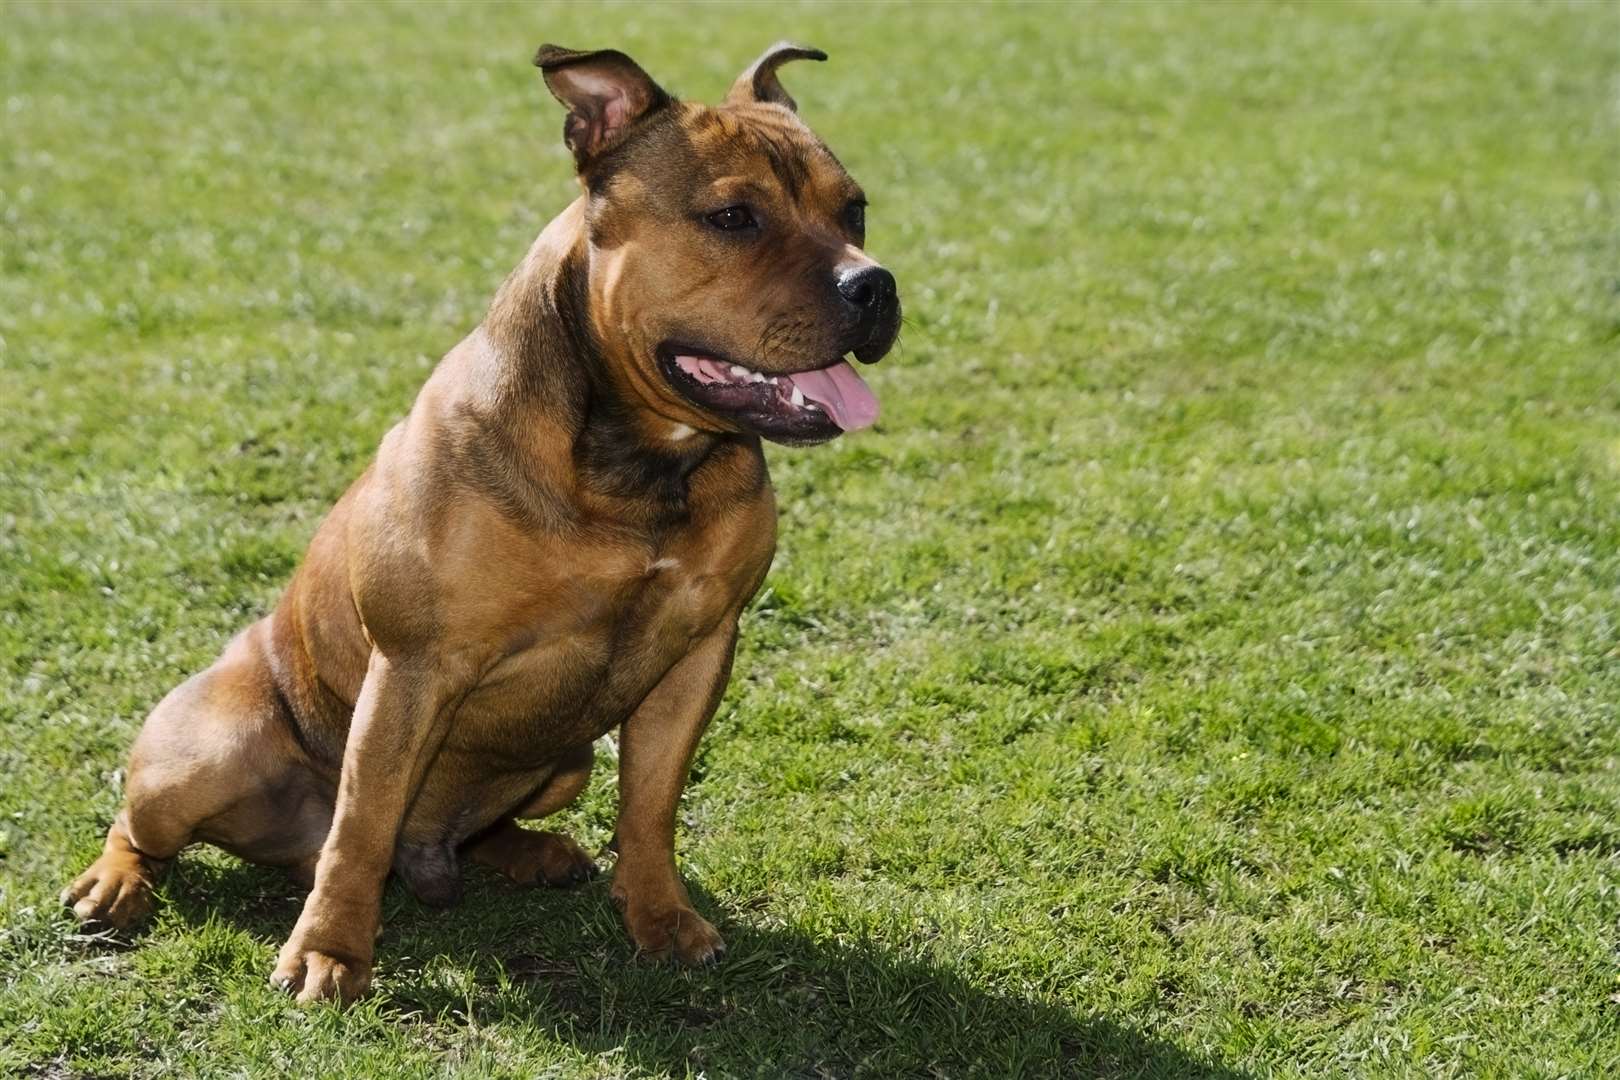 A Staffordshire bull terrier-type dog. Stock image